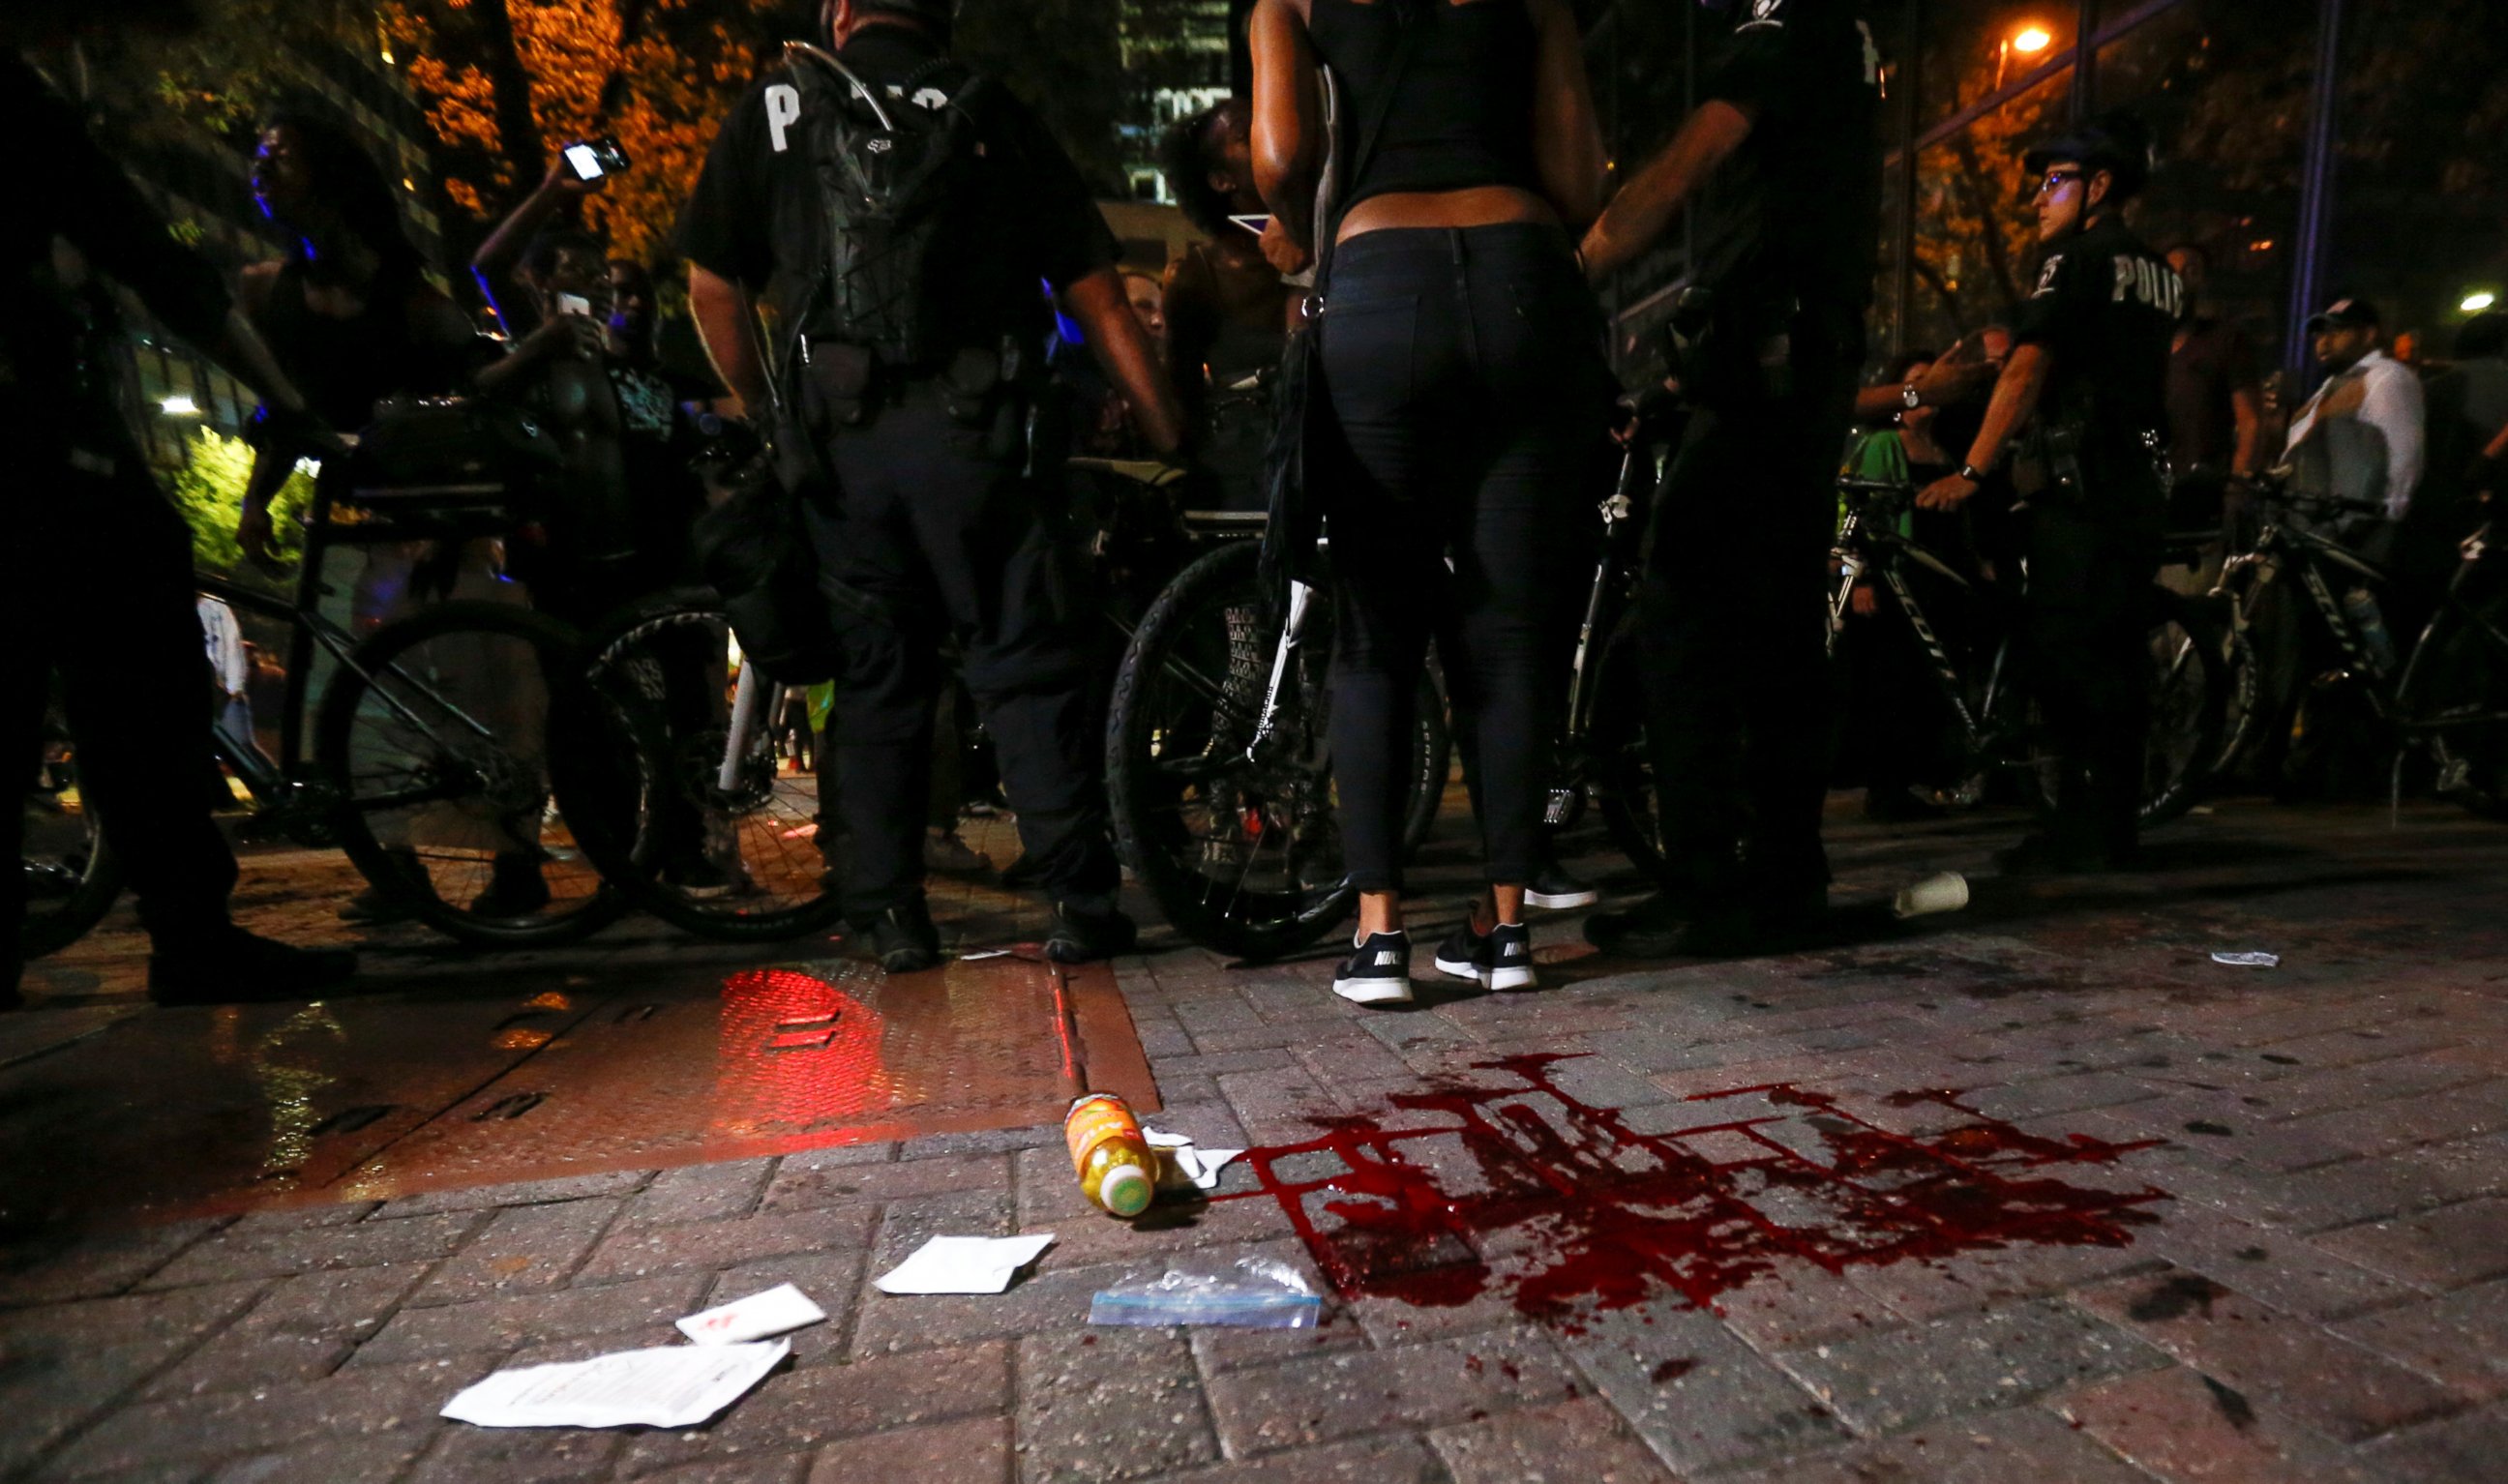 PHOTO: Blood covers the pavement where a person was shot in Charlotte, North Carolina during a protest, Sept. 21, 2016.